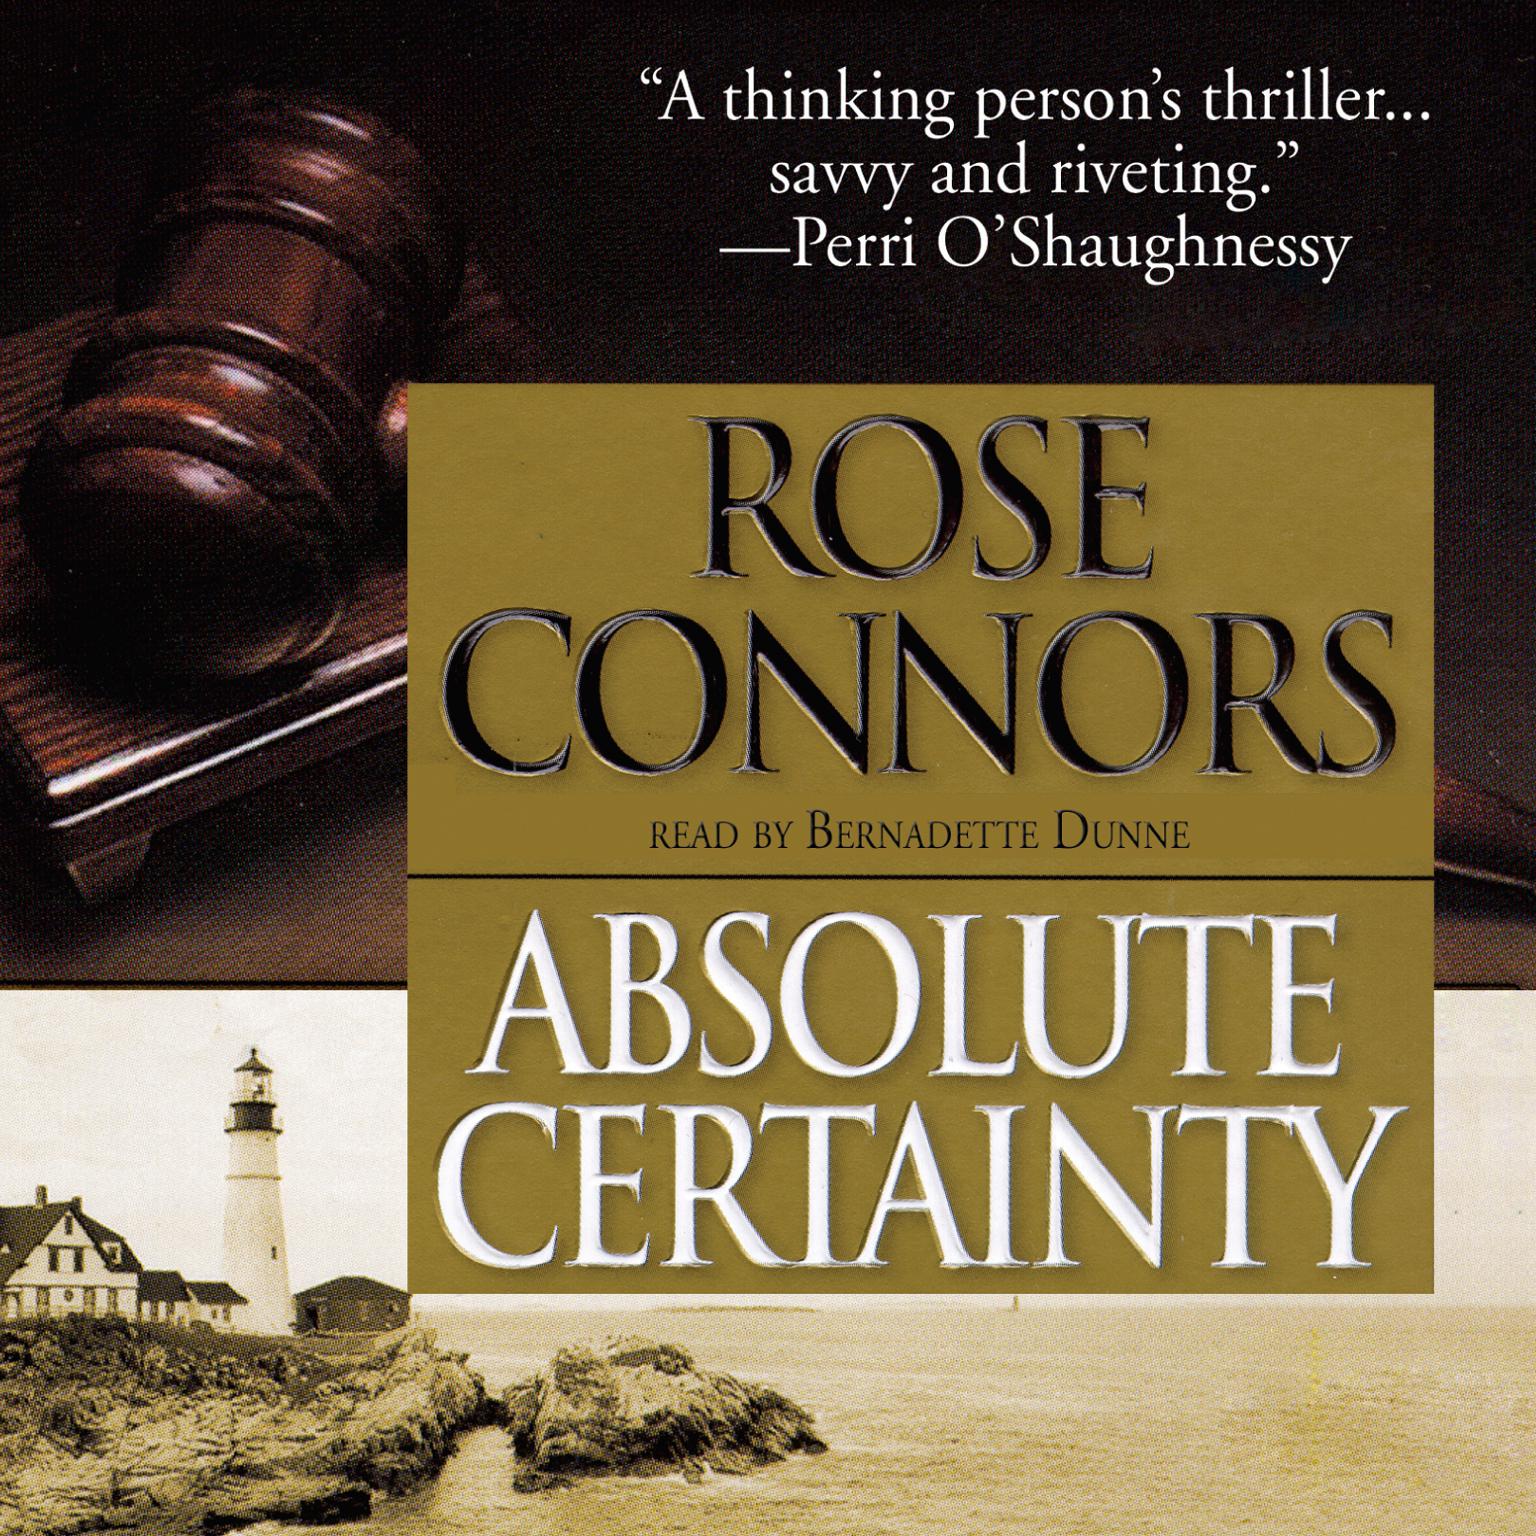 Absolute Certainty Audiobook, by Rose Connors